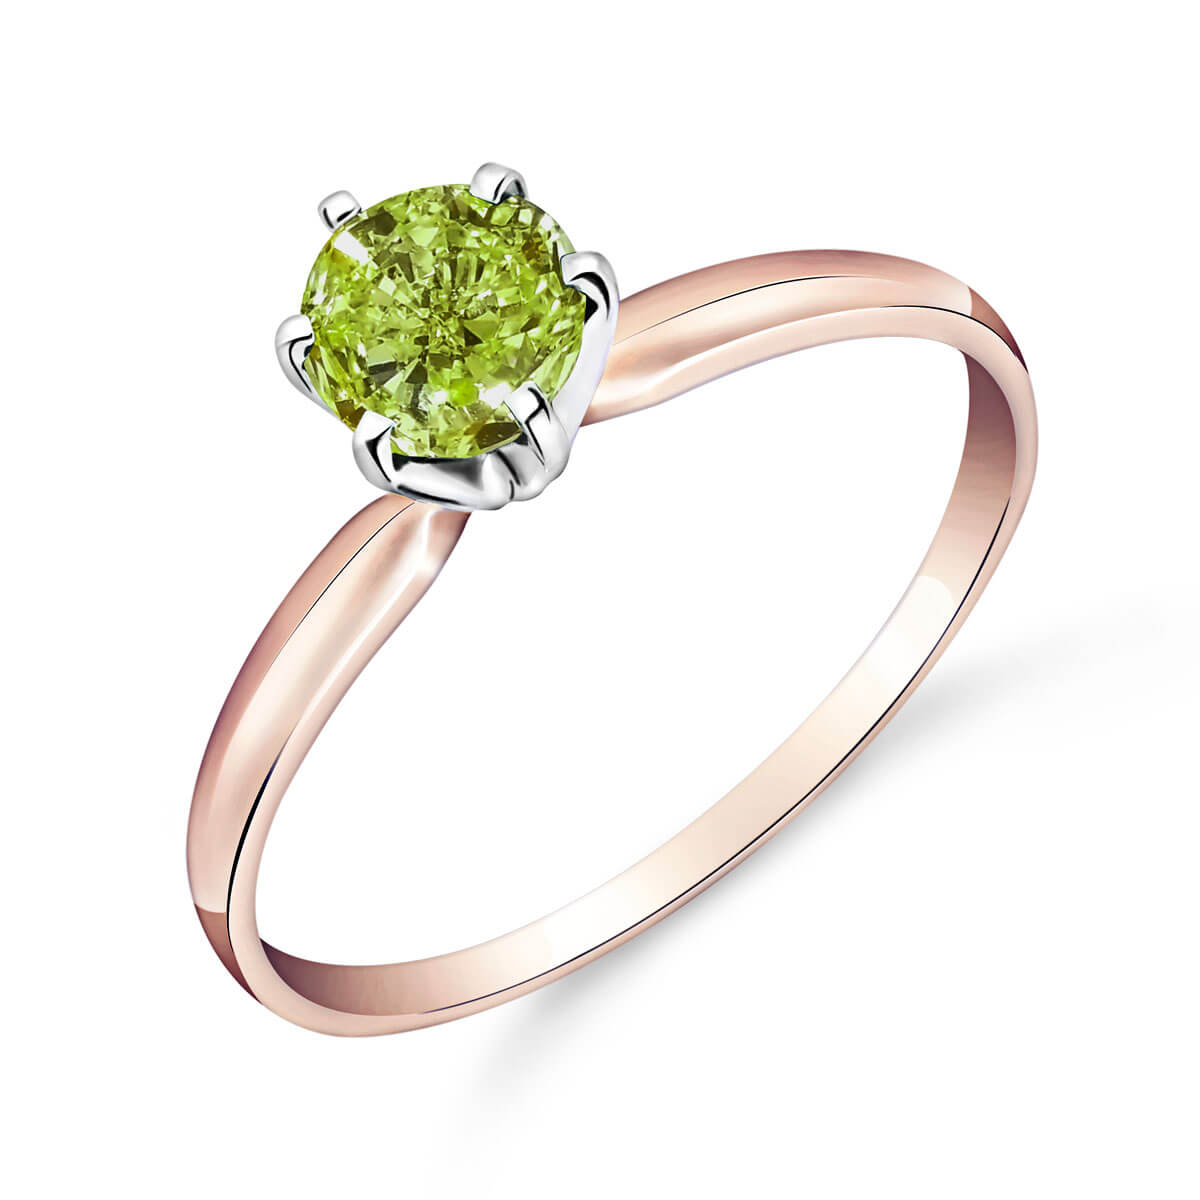 Green Diamond Crown Solitaire Ring 0.5 ct in 9ct Rose Gold